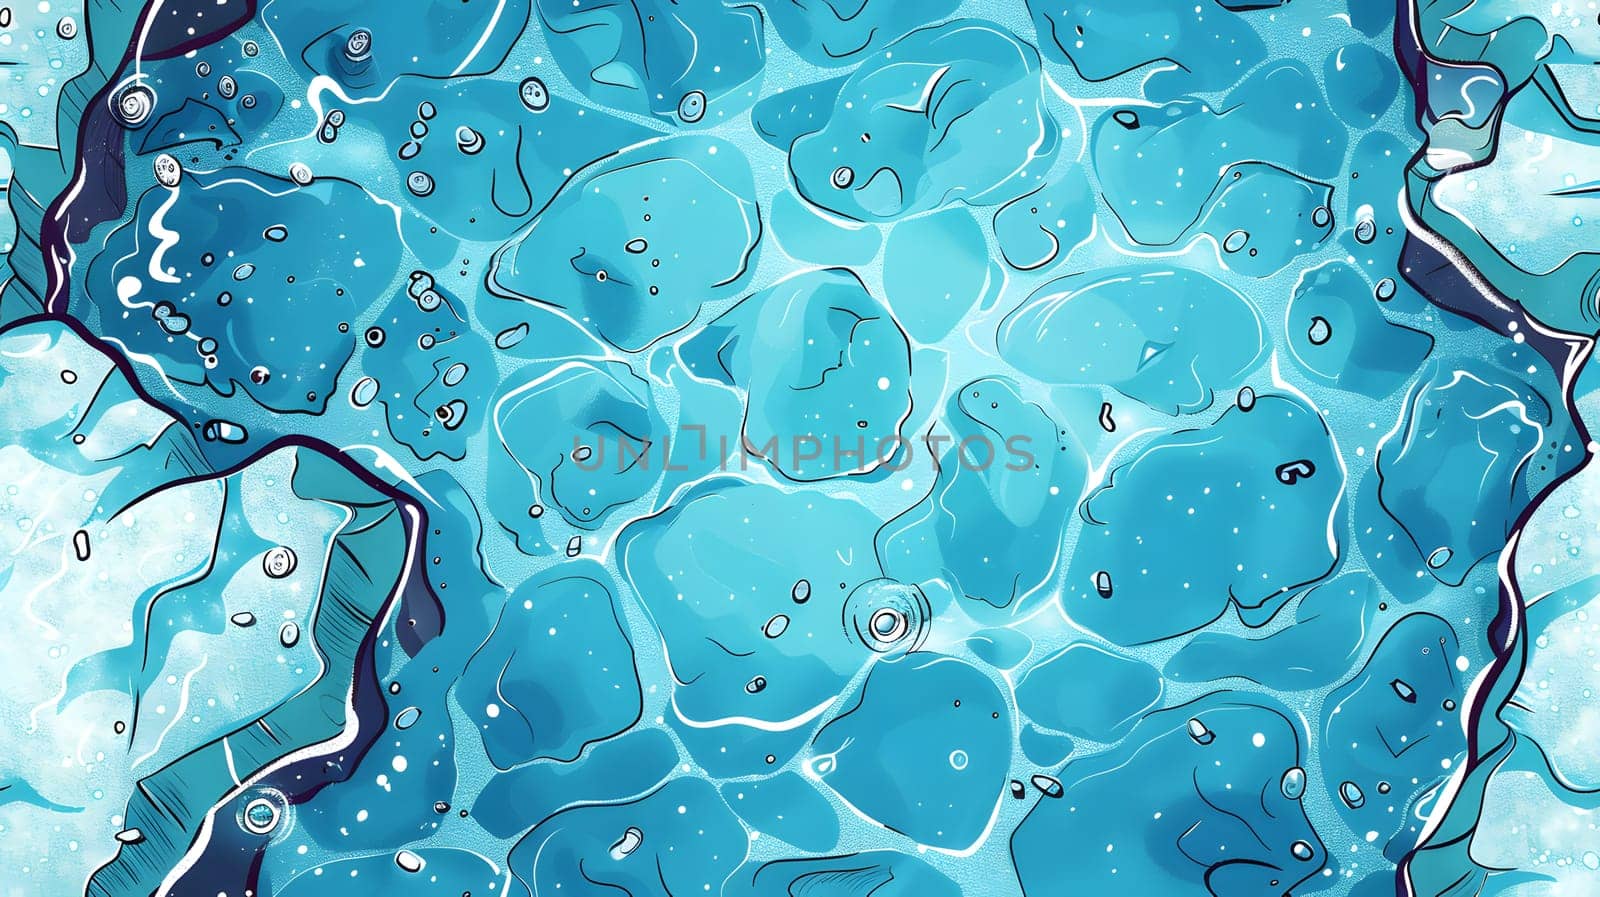 A closeup capture of azure water surface with electric blue bubbles creating an artistic pattern of fluidity. The transparent material showcases the beauty of liquid in an aqua hue